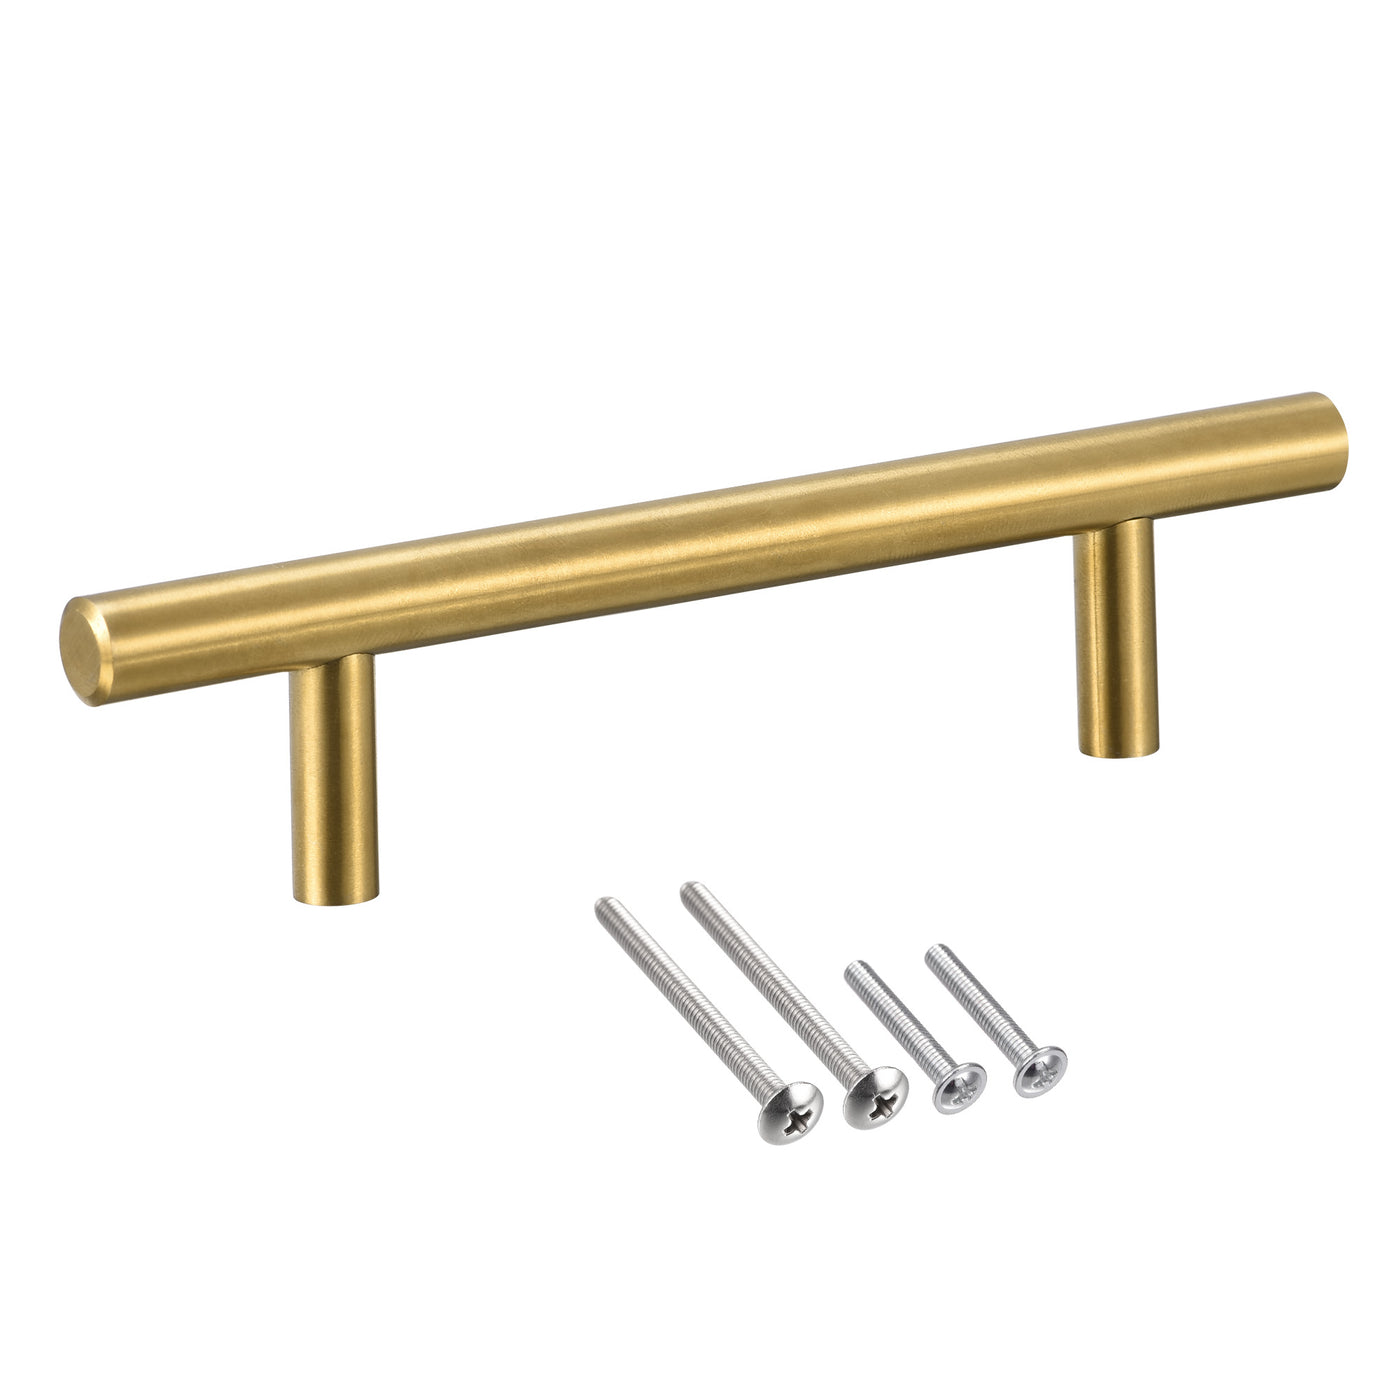 uxcell Uxcell T Bar Pull Handle, 6"(150mm) Length 10mm Dia Stainless Steel Cabinet Pulls 3.8"(96mm) Hole Center Distance Gold Tone 4pcs